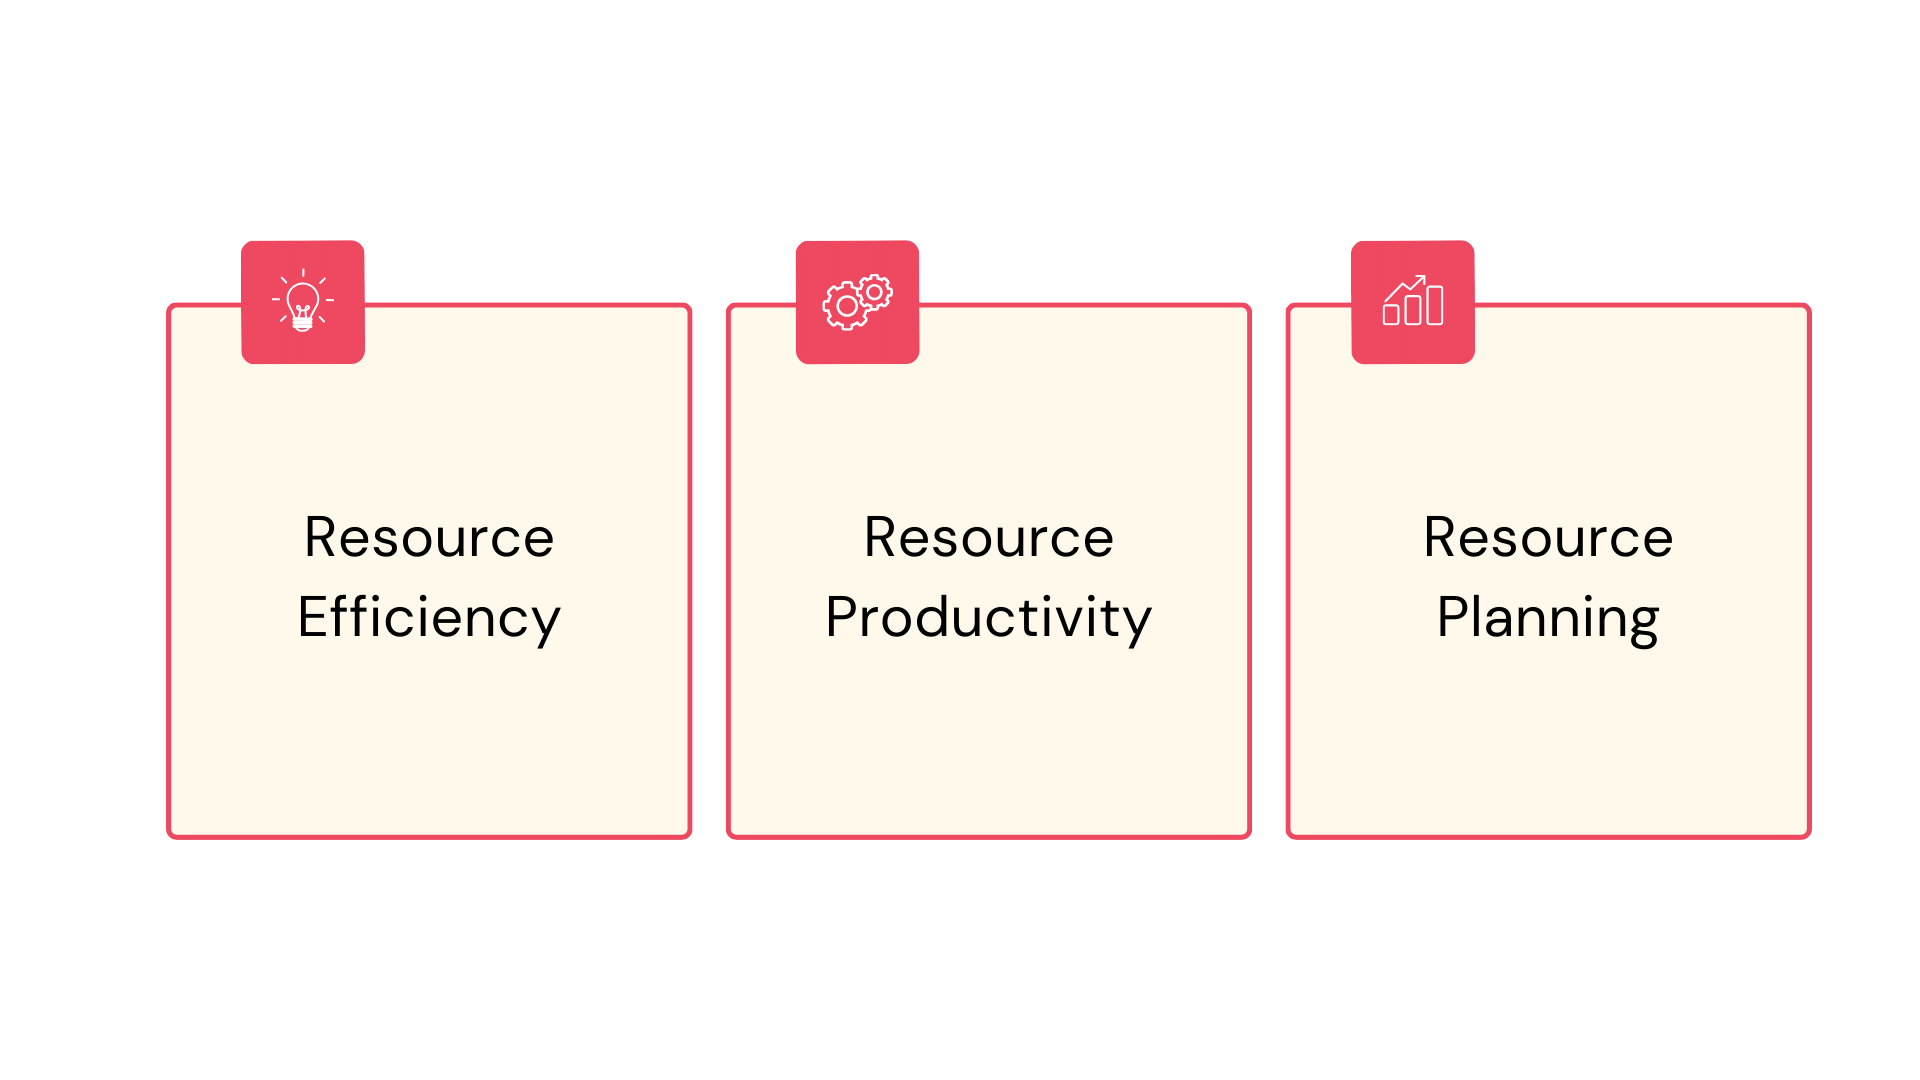 Resource onboarding time